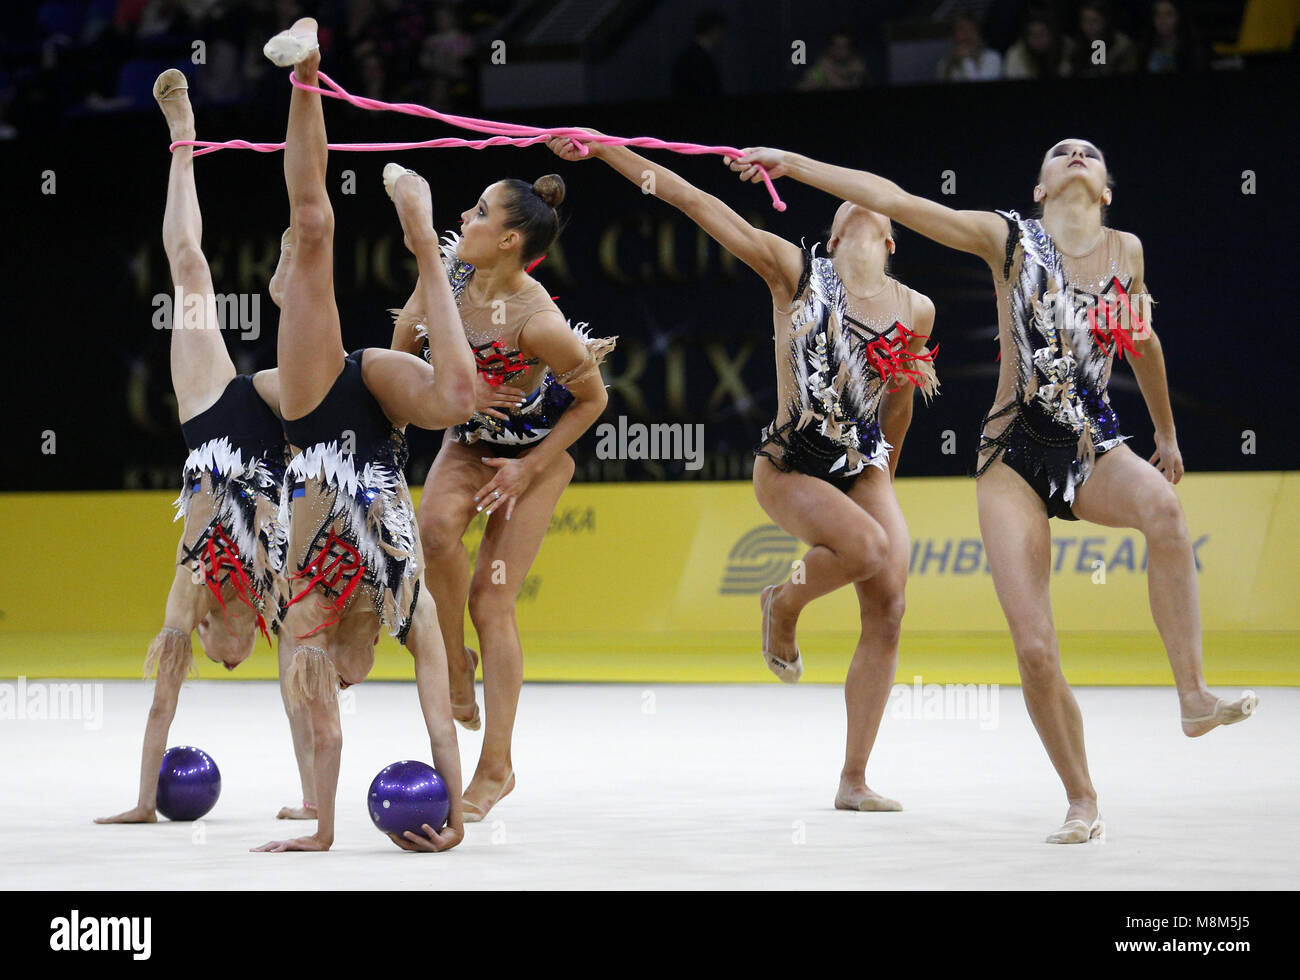 Group gymnasts from Estonia performs during the competition for the Deriugina Cup in Kyiv, Ukraine, March 17, 2018. 17th Mar, 2018. Credit: Anatolii Stepanov/ZUMA Wire/Alamy Live News Stock Photo